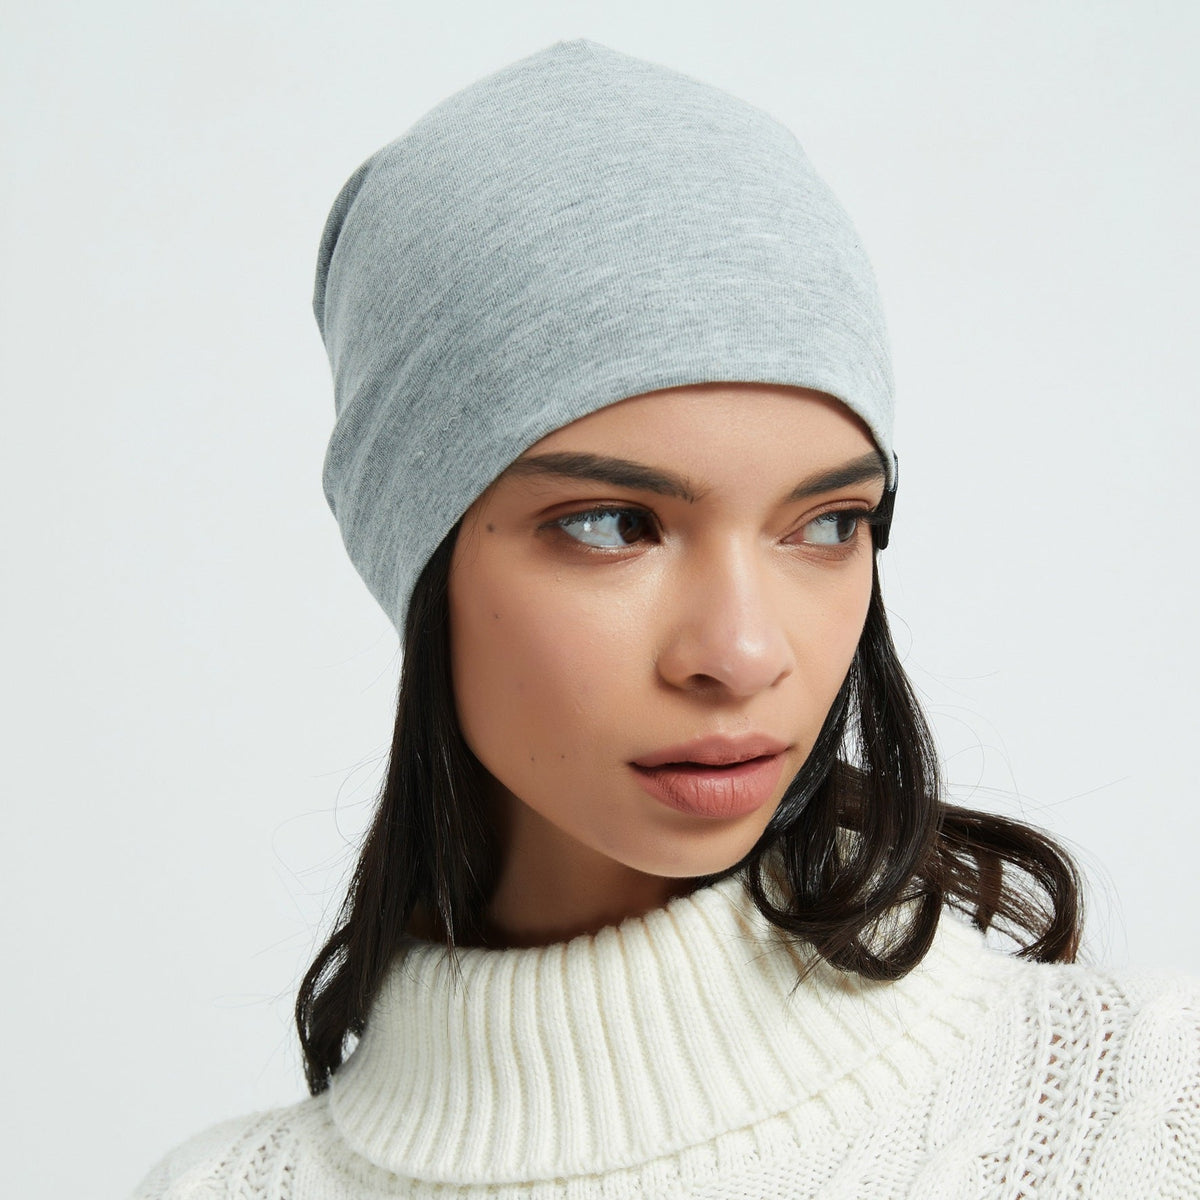 Women with EMF Beanie Grey color, close view